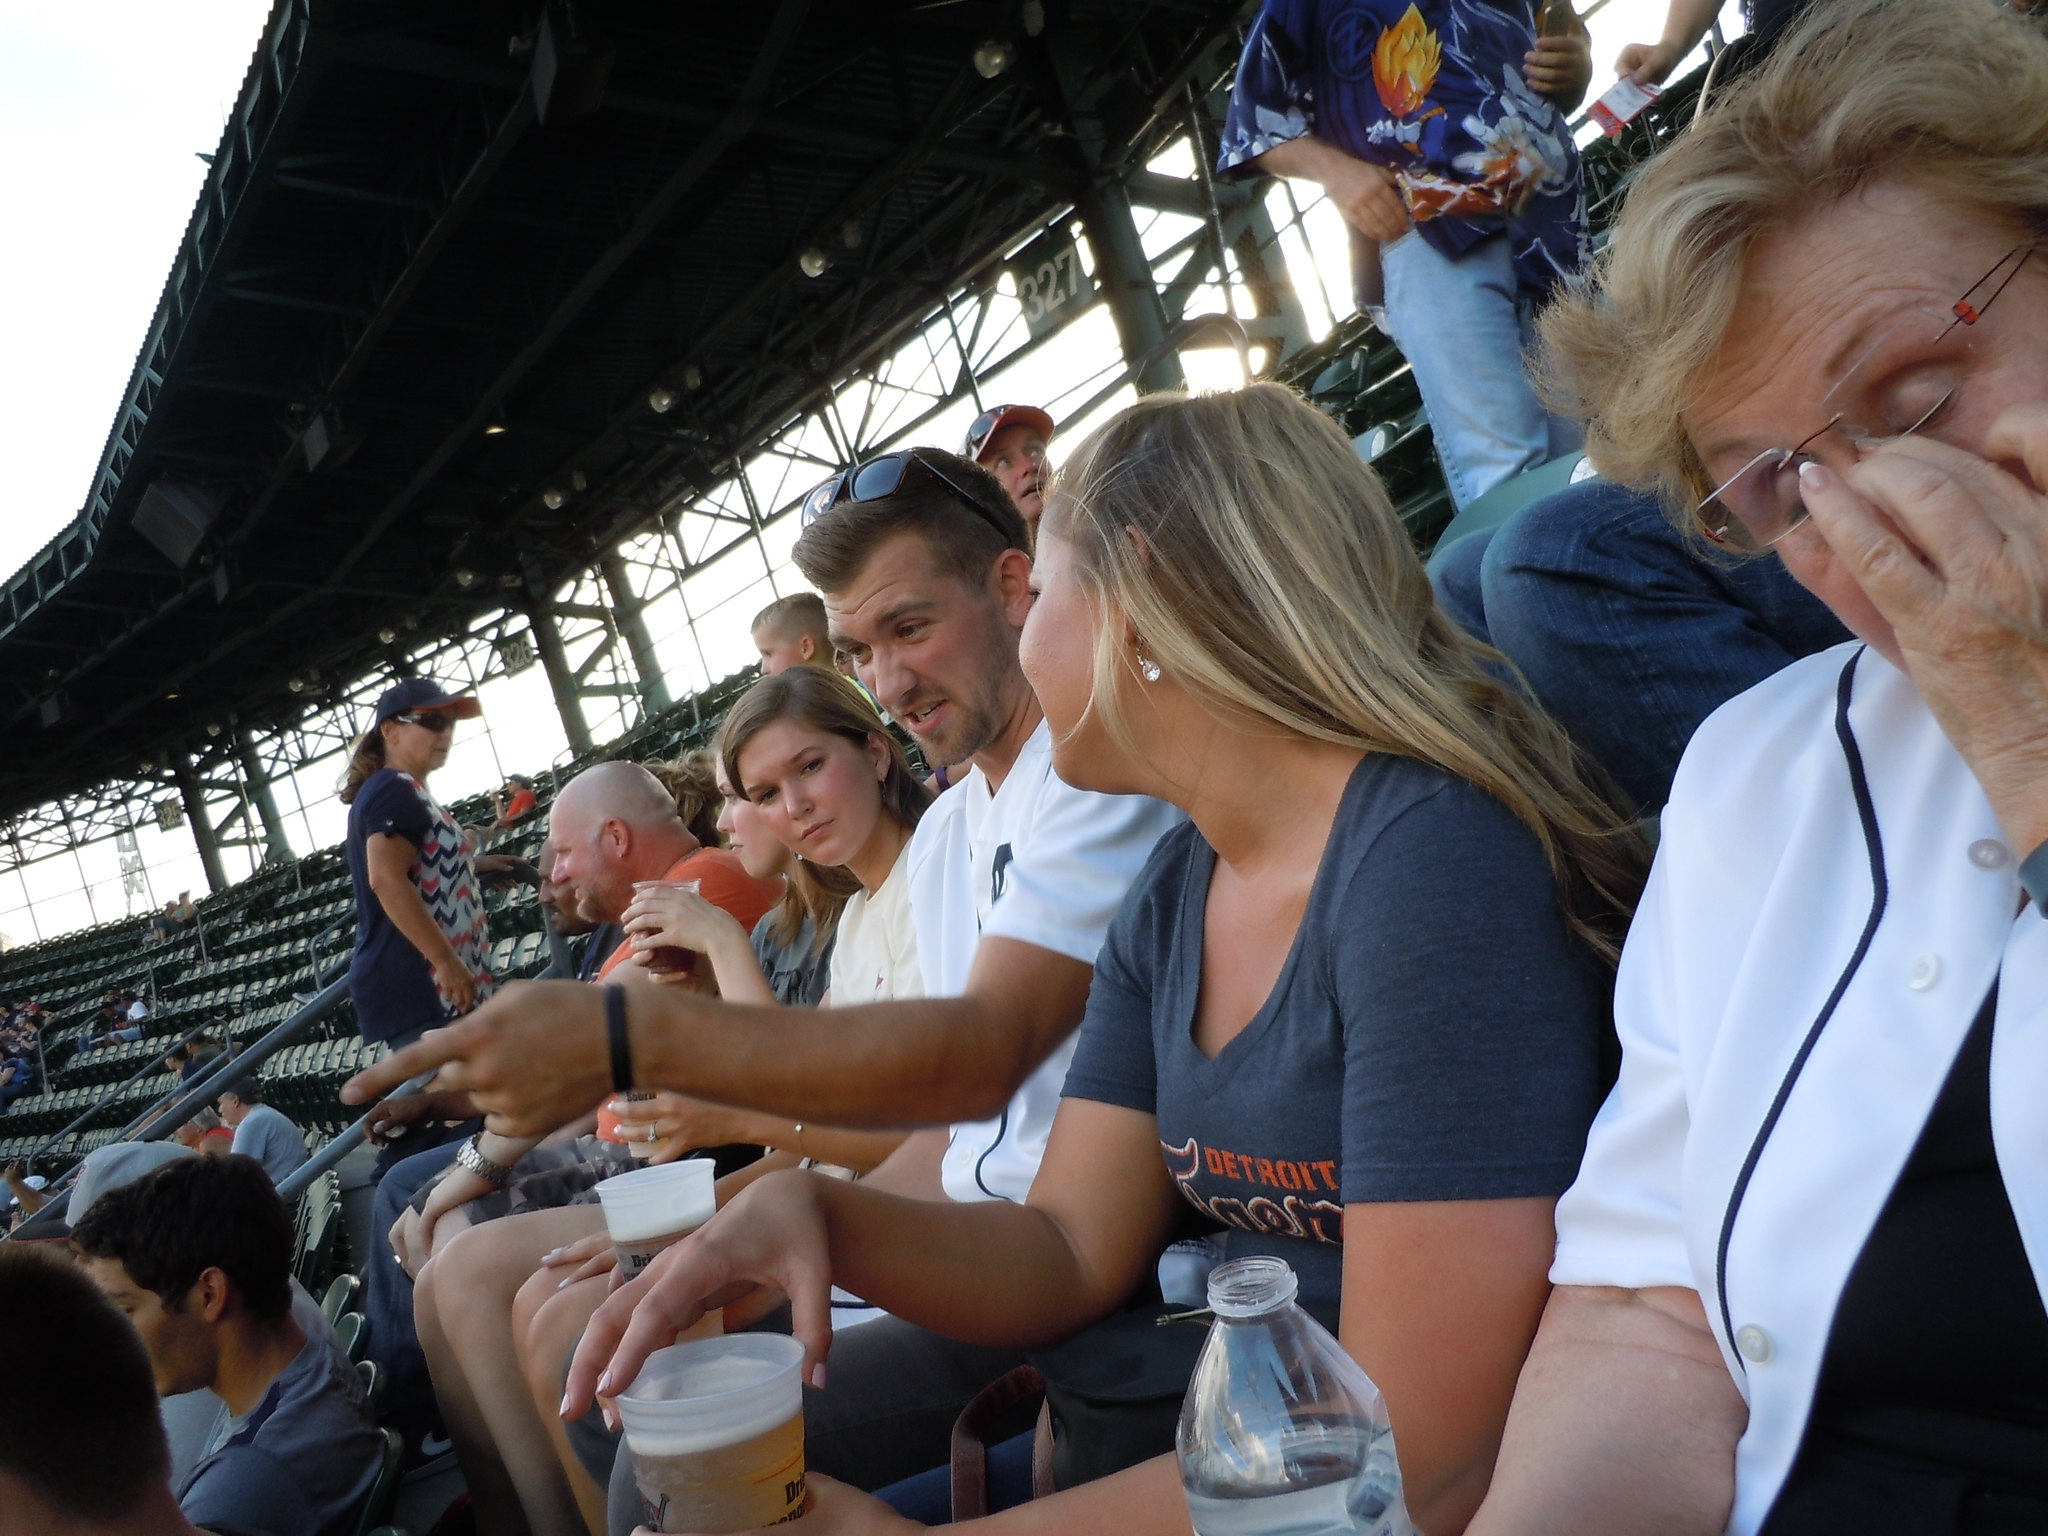 2016 Tigers & BBQ (35) - Game Day at Comerica Park